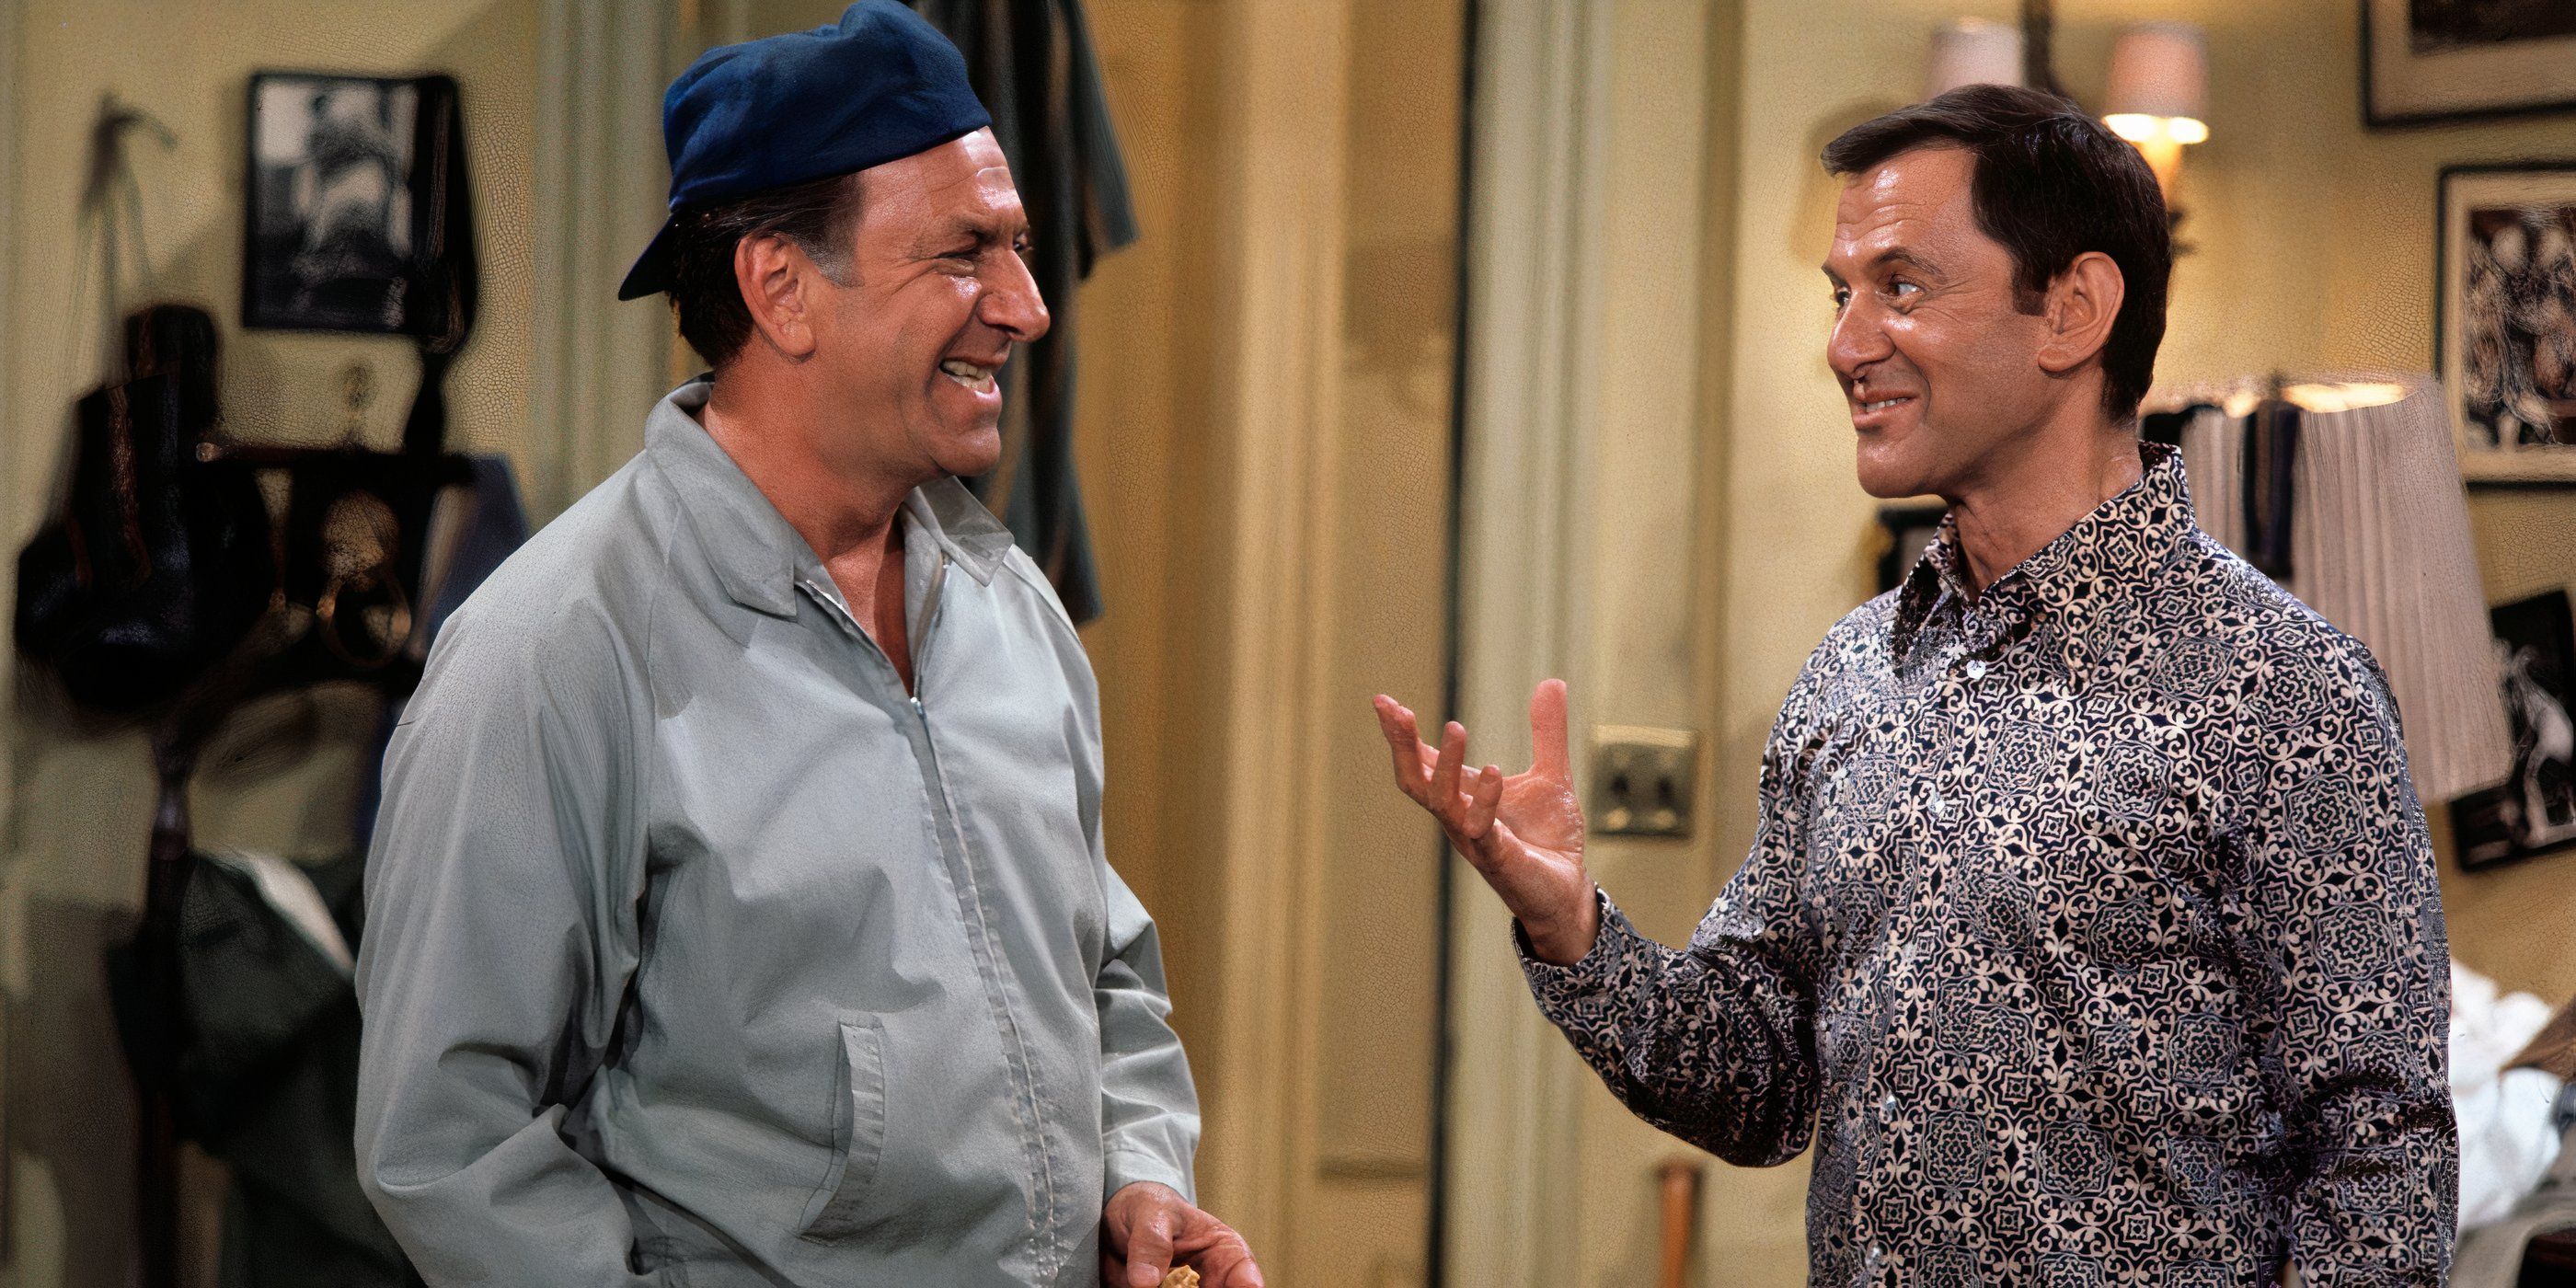 Jack Klugman and Tony Randall in 'The Odd Couple'